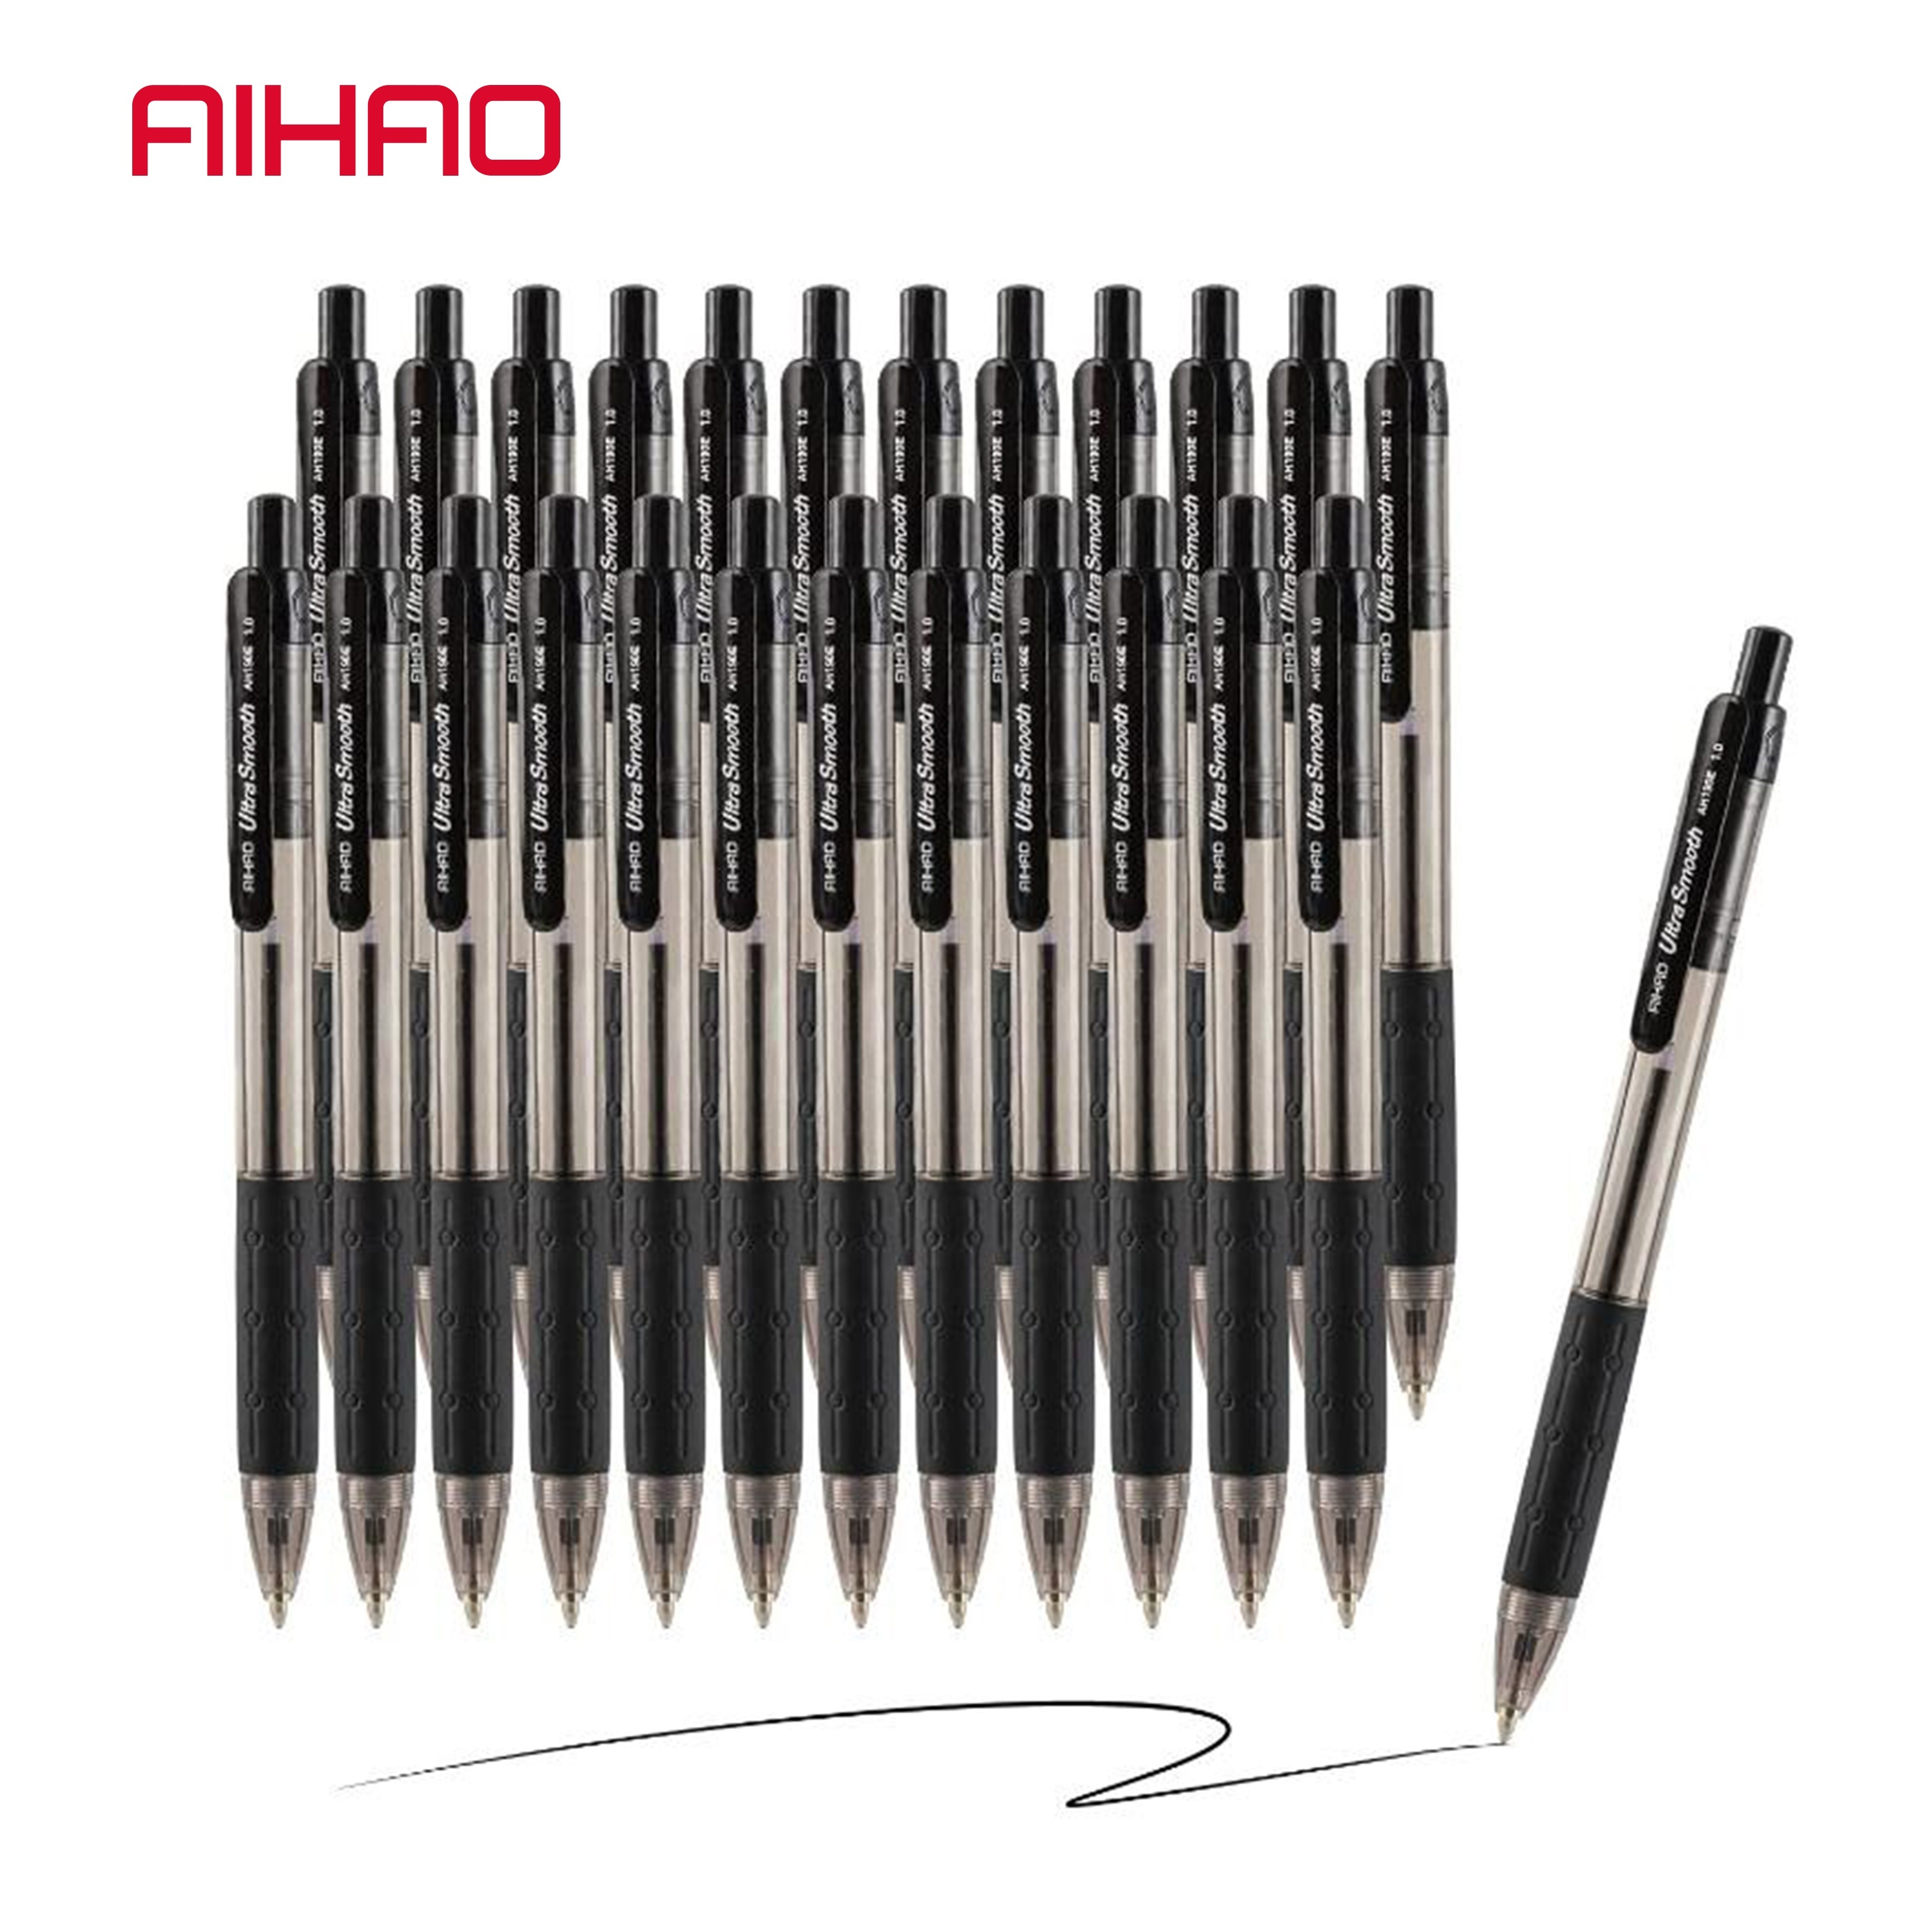 

Aihao Retractable Ballpoint Pens, Black Ink, Medium Point (1.0mm), 24 Pack, Hybrid Ink Pens For Smooth Writing